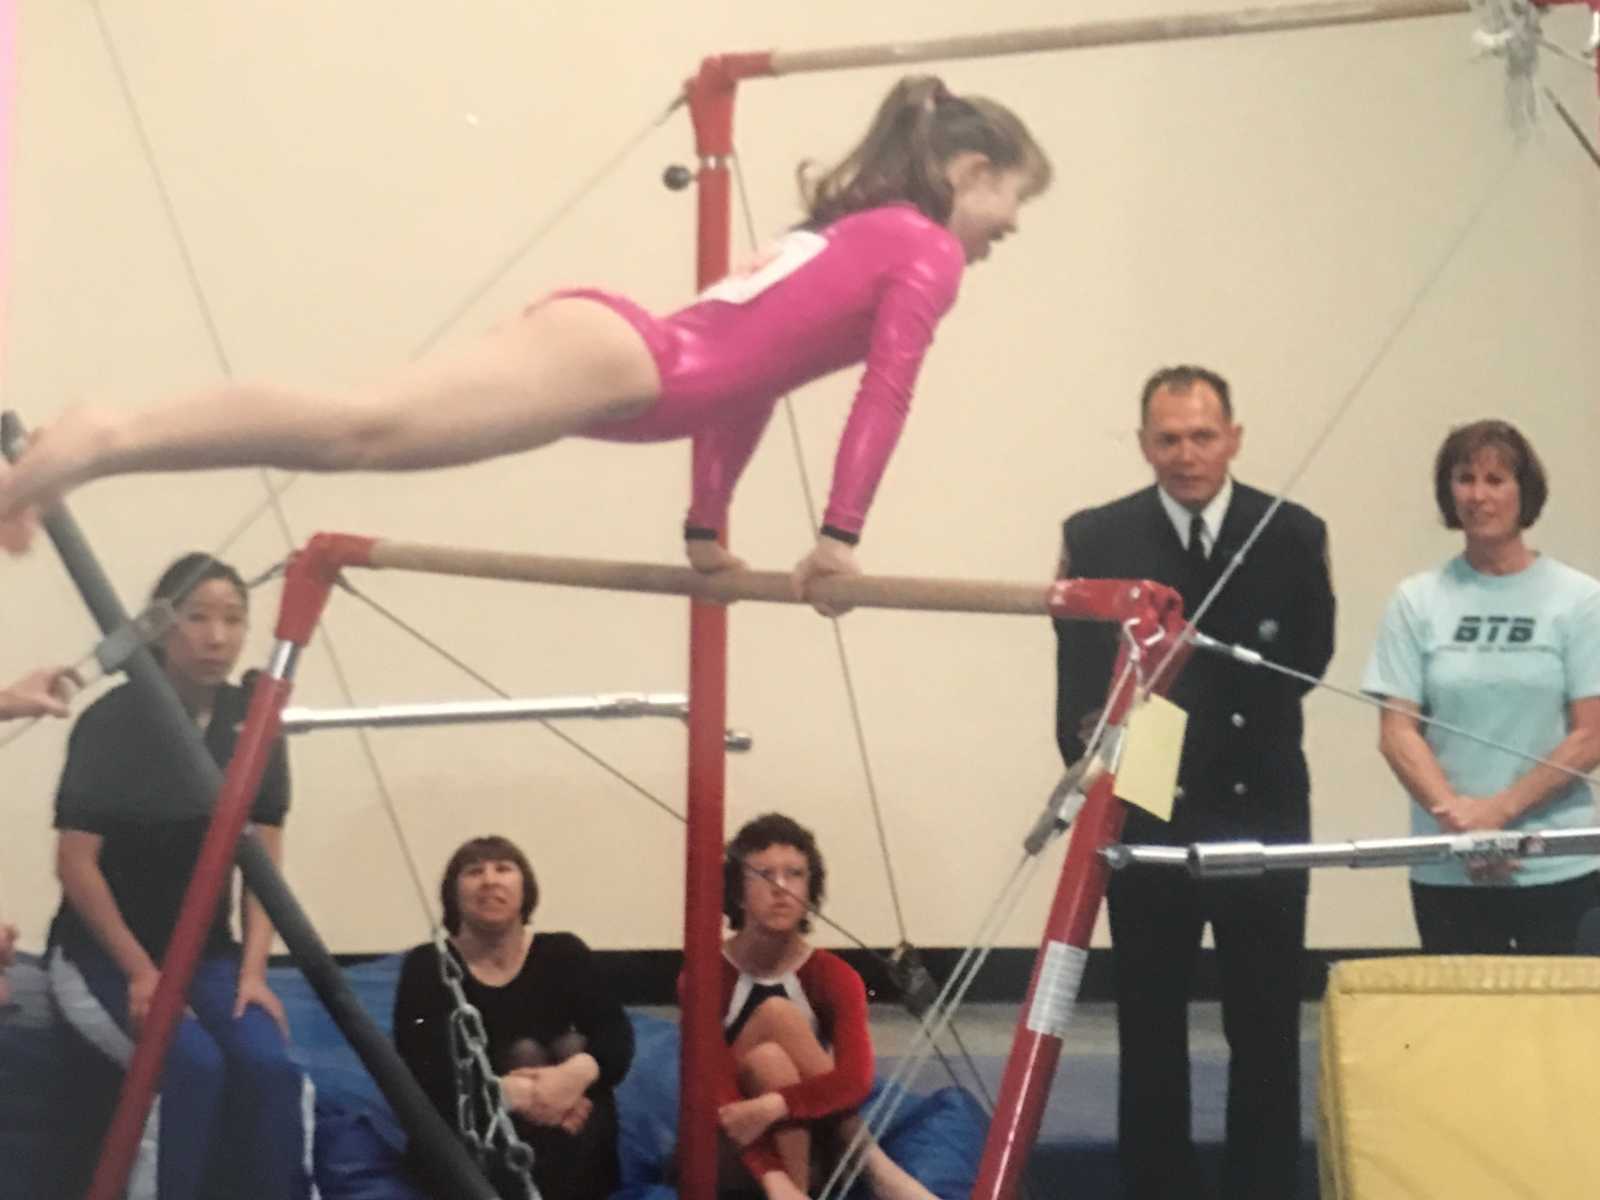 down syndrome girl in sparkly pink leotard at gymnastics competition on the uneven bars with people watching